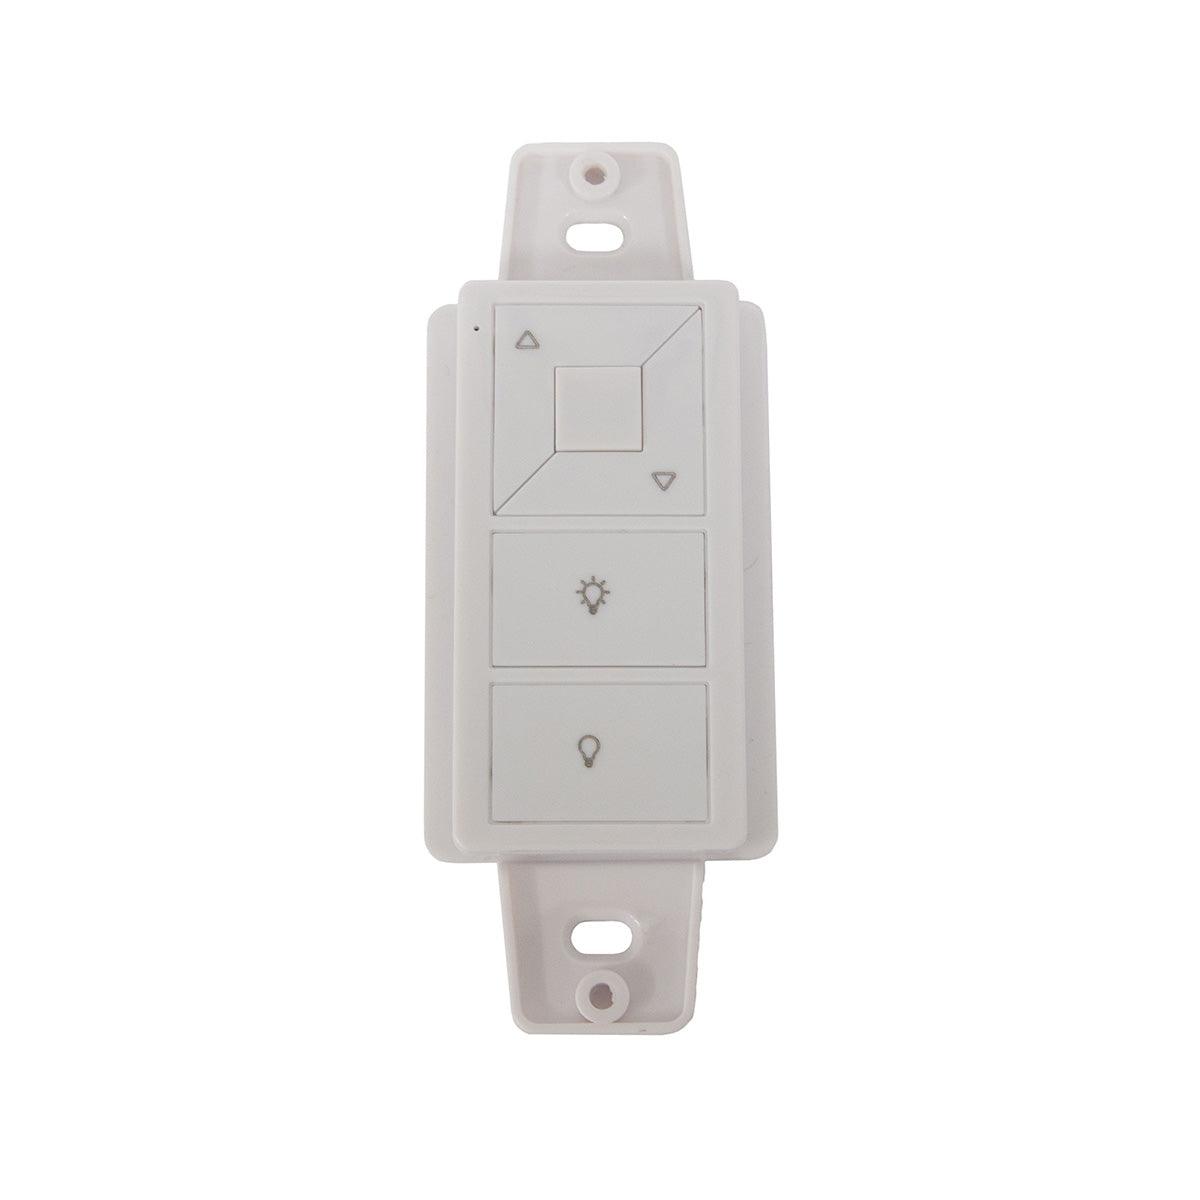 TOUCHDIAL Wall Mount RGB(W) LED Controller, Single Zone